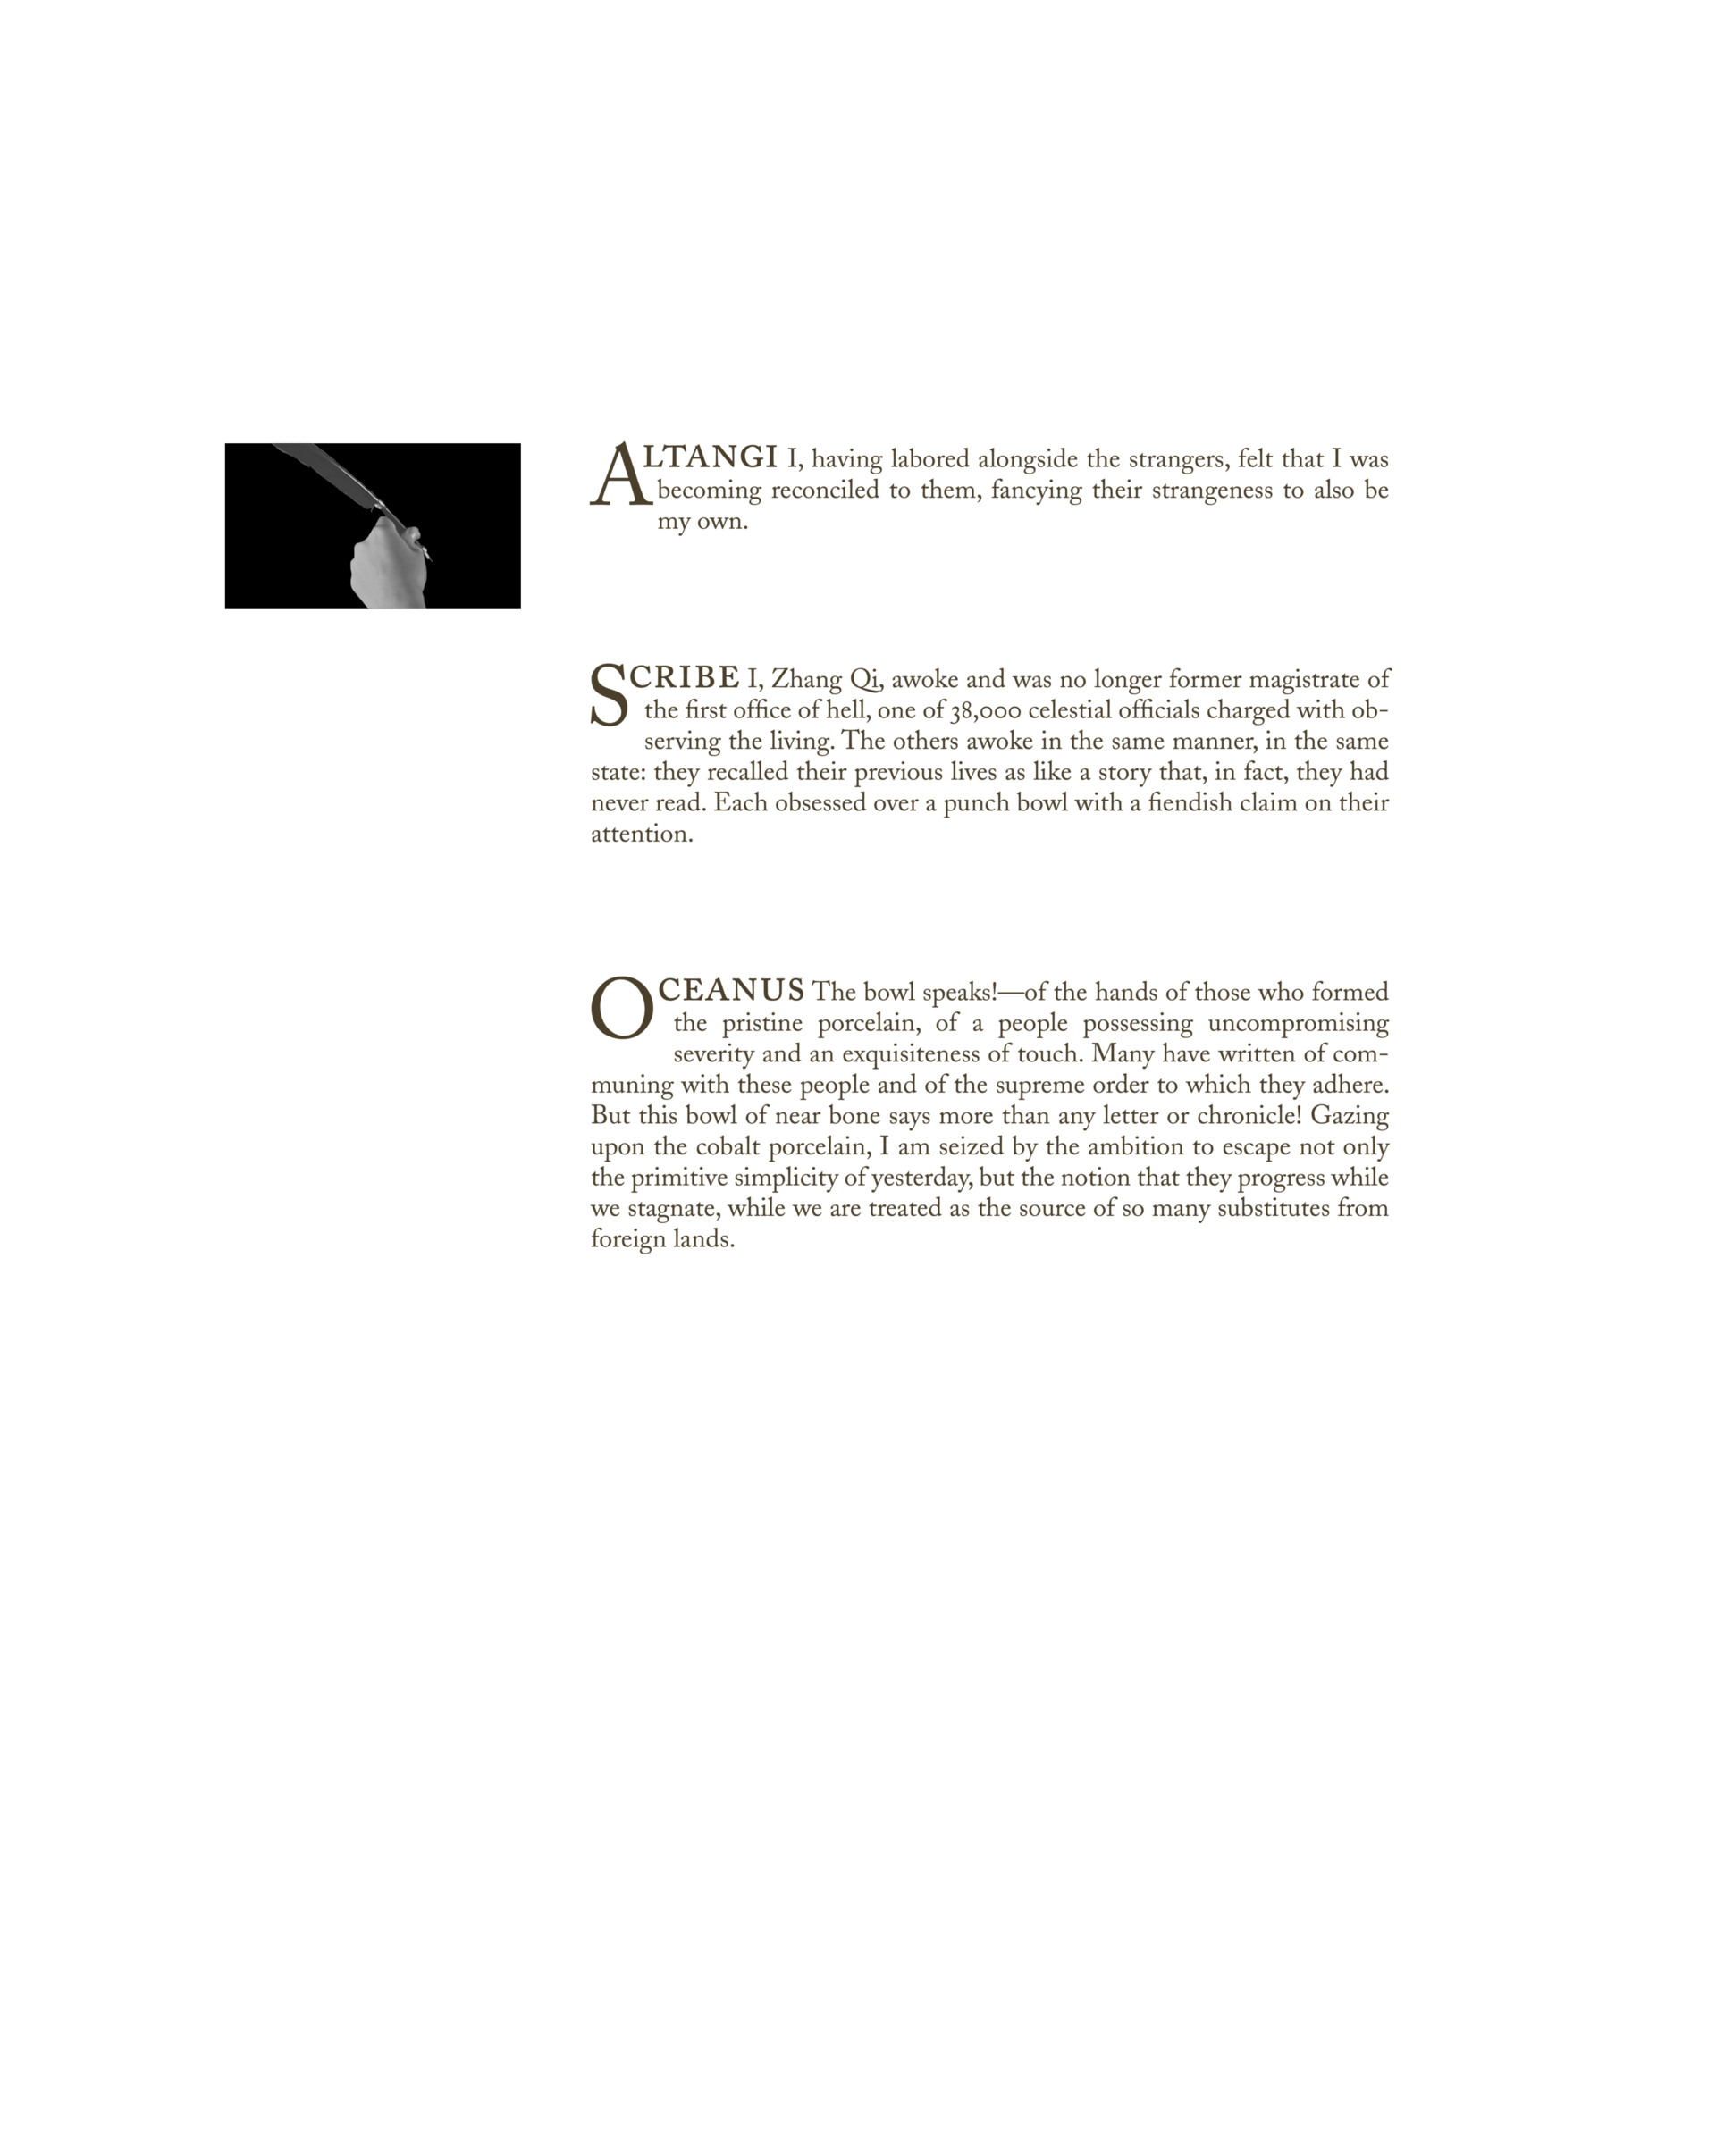 Pendleton Collection Catalog Page: Script text with Altangi, Scribe, and Oceanus, with a black and white photograph of a hand with a quill